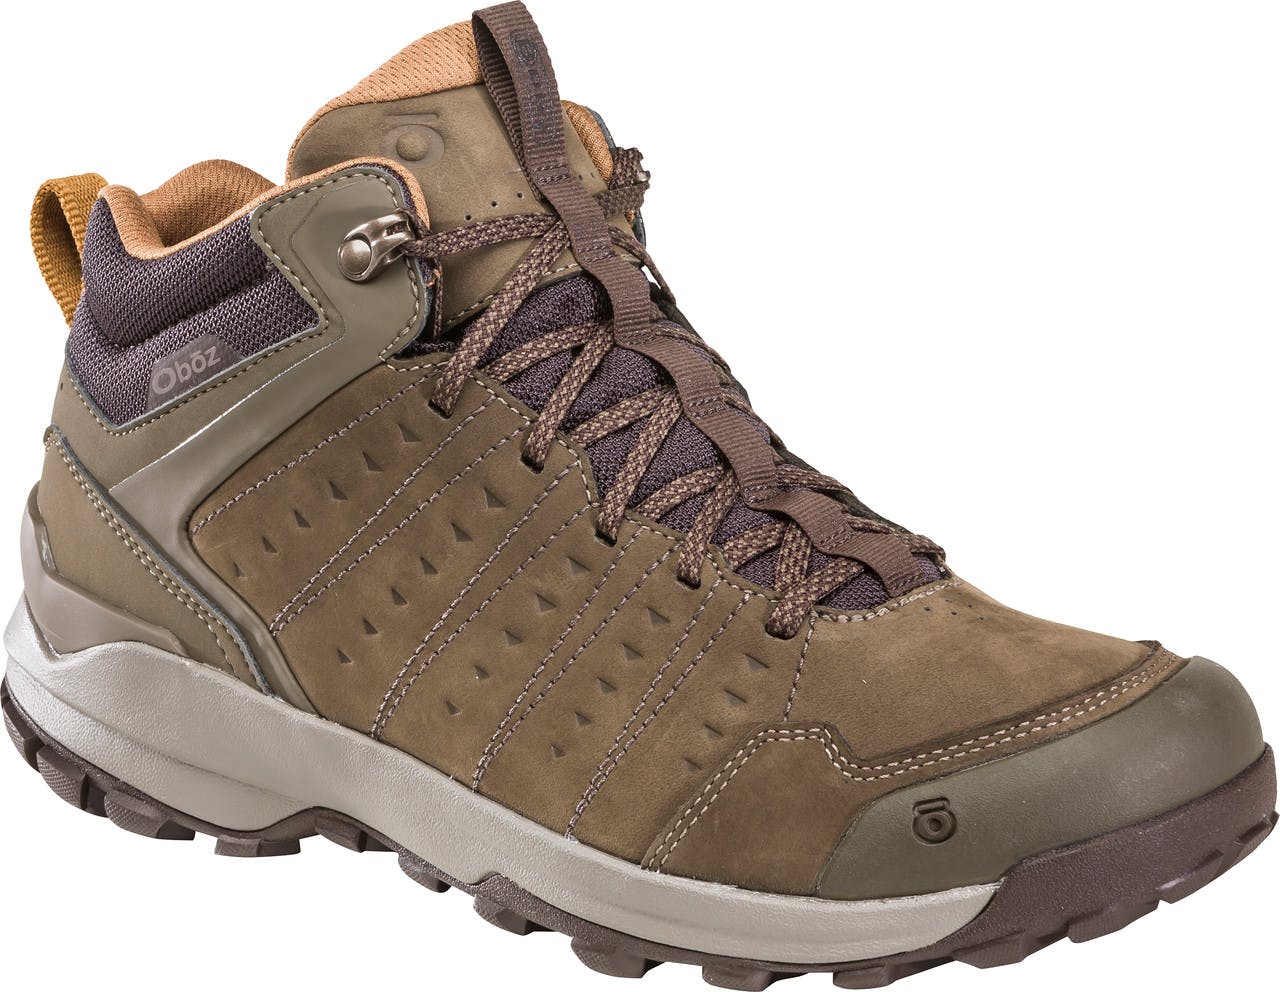 Sypes Mid Leather B-Dry Hiking Shoes Cedar Brown